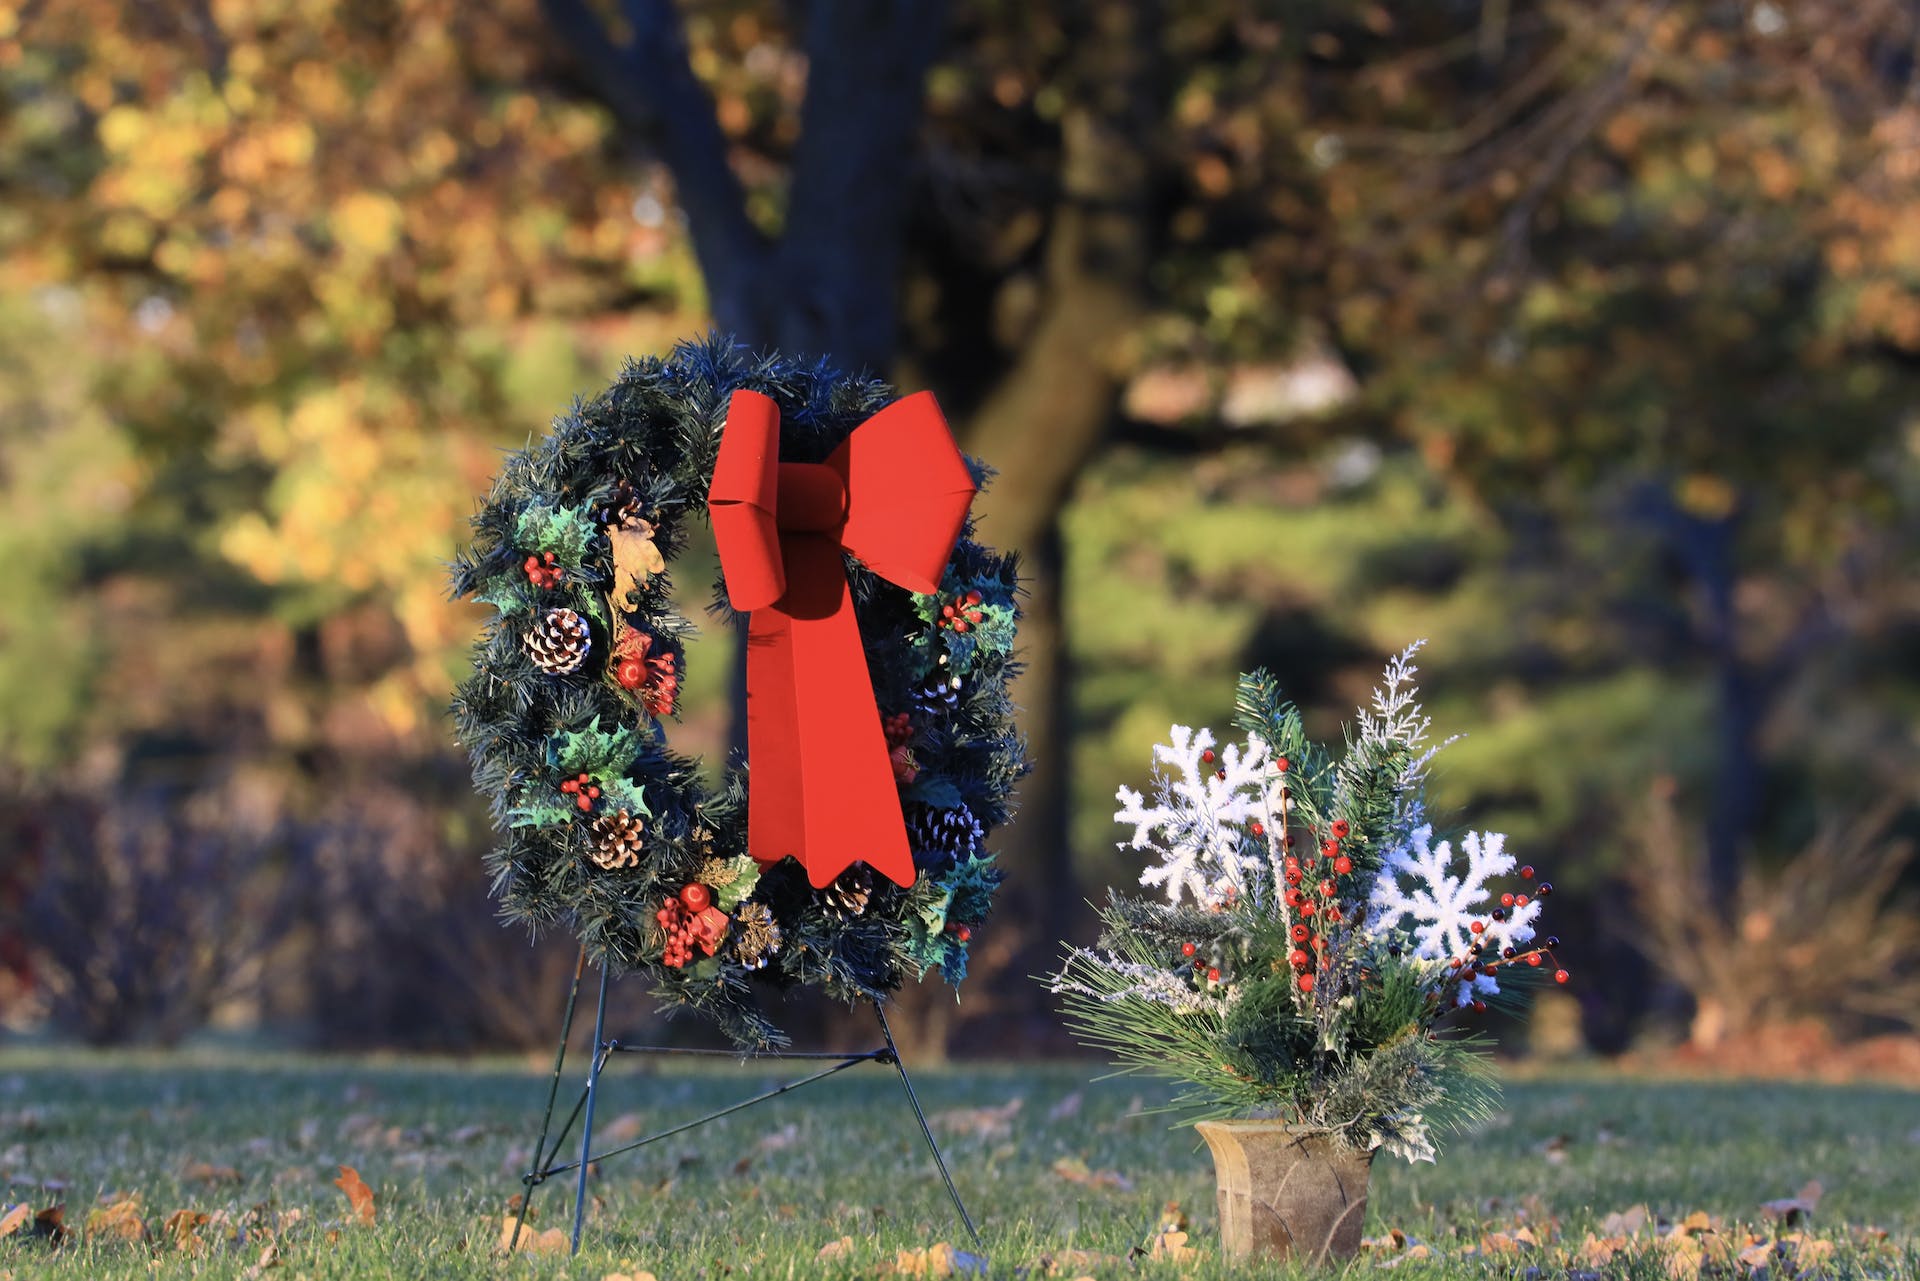 For many who are suffering with prolonged grief, the holidays can be a time to reflect and find meaning in loss